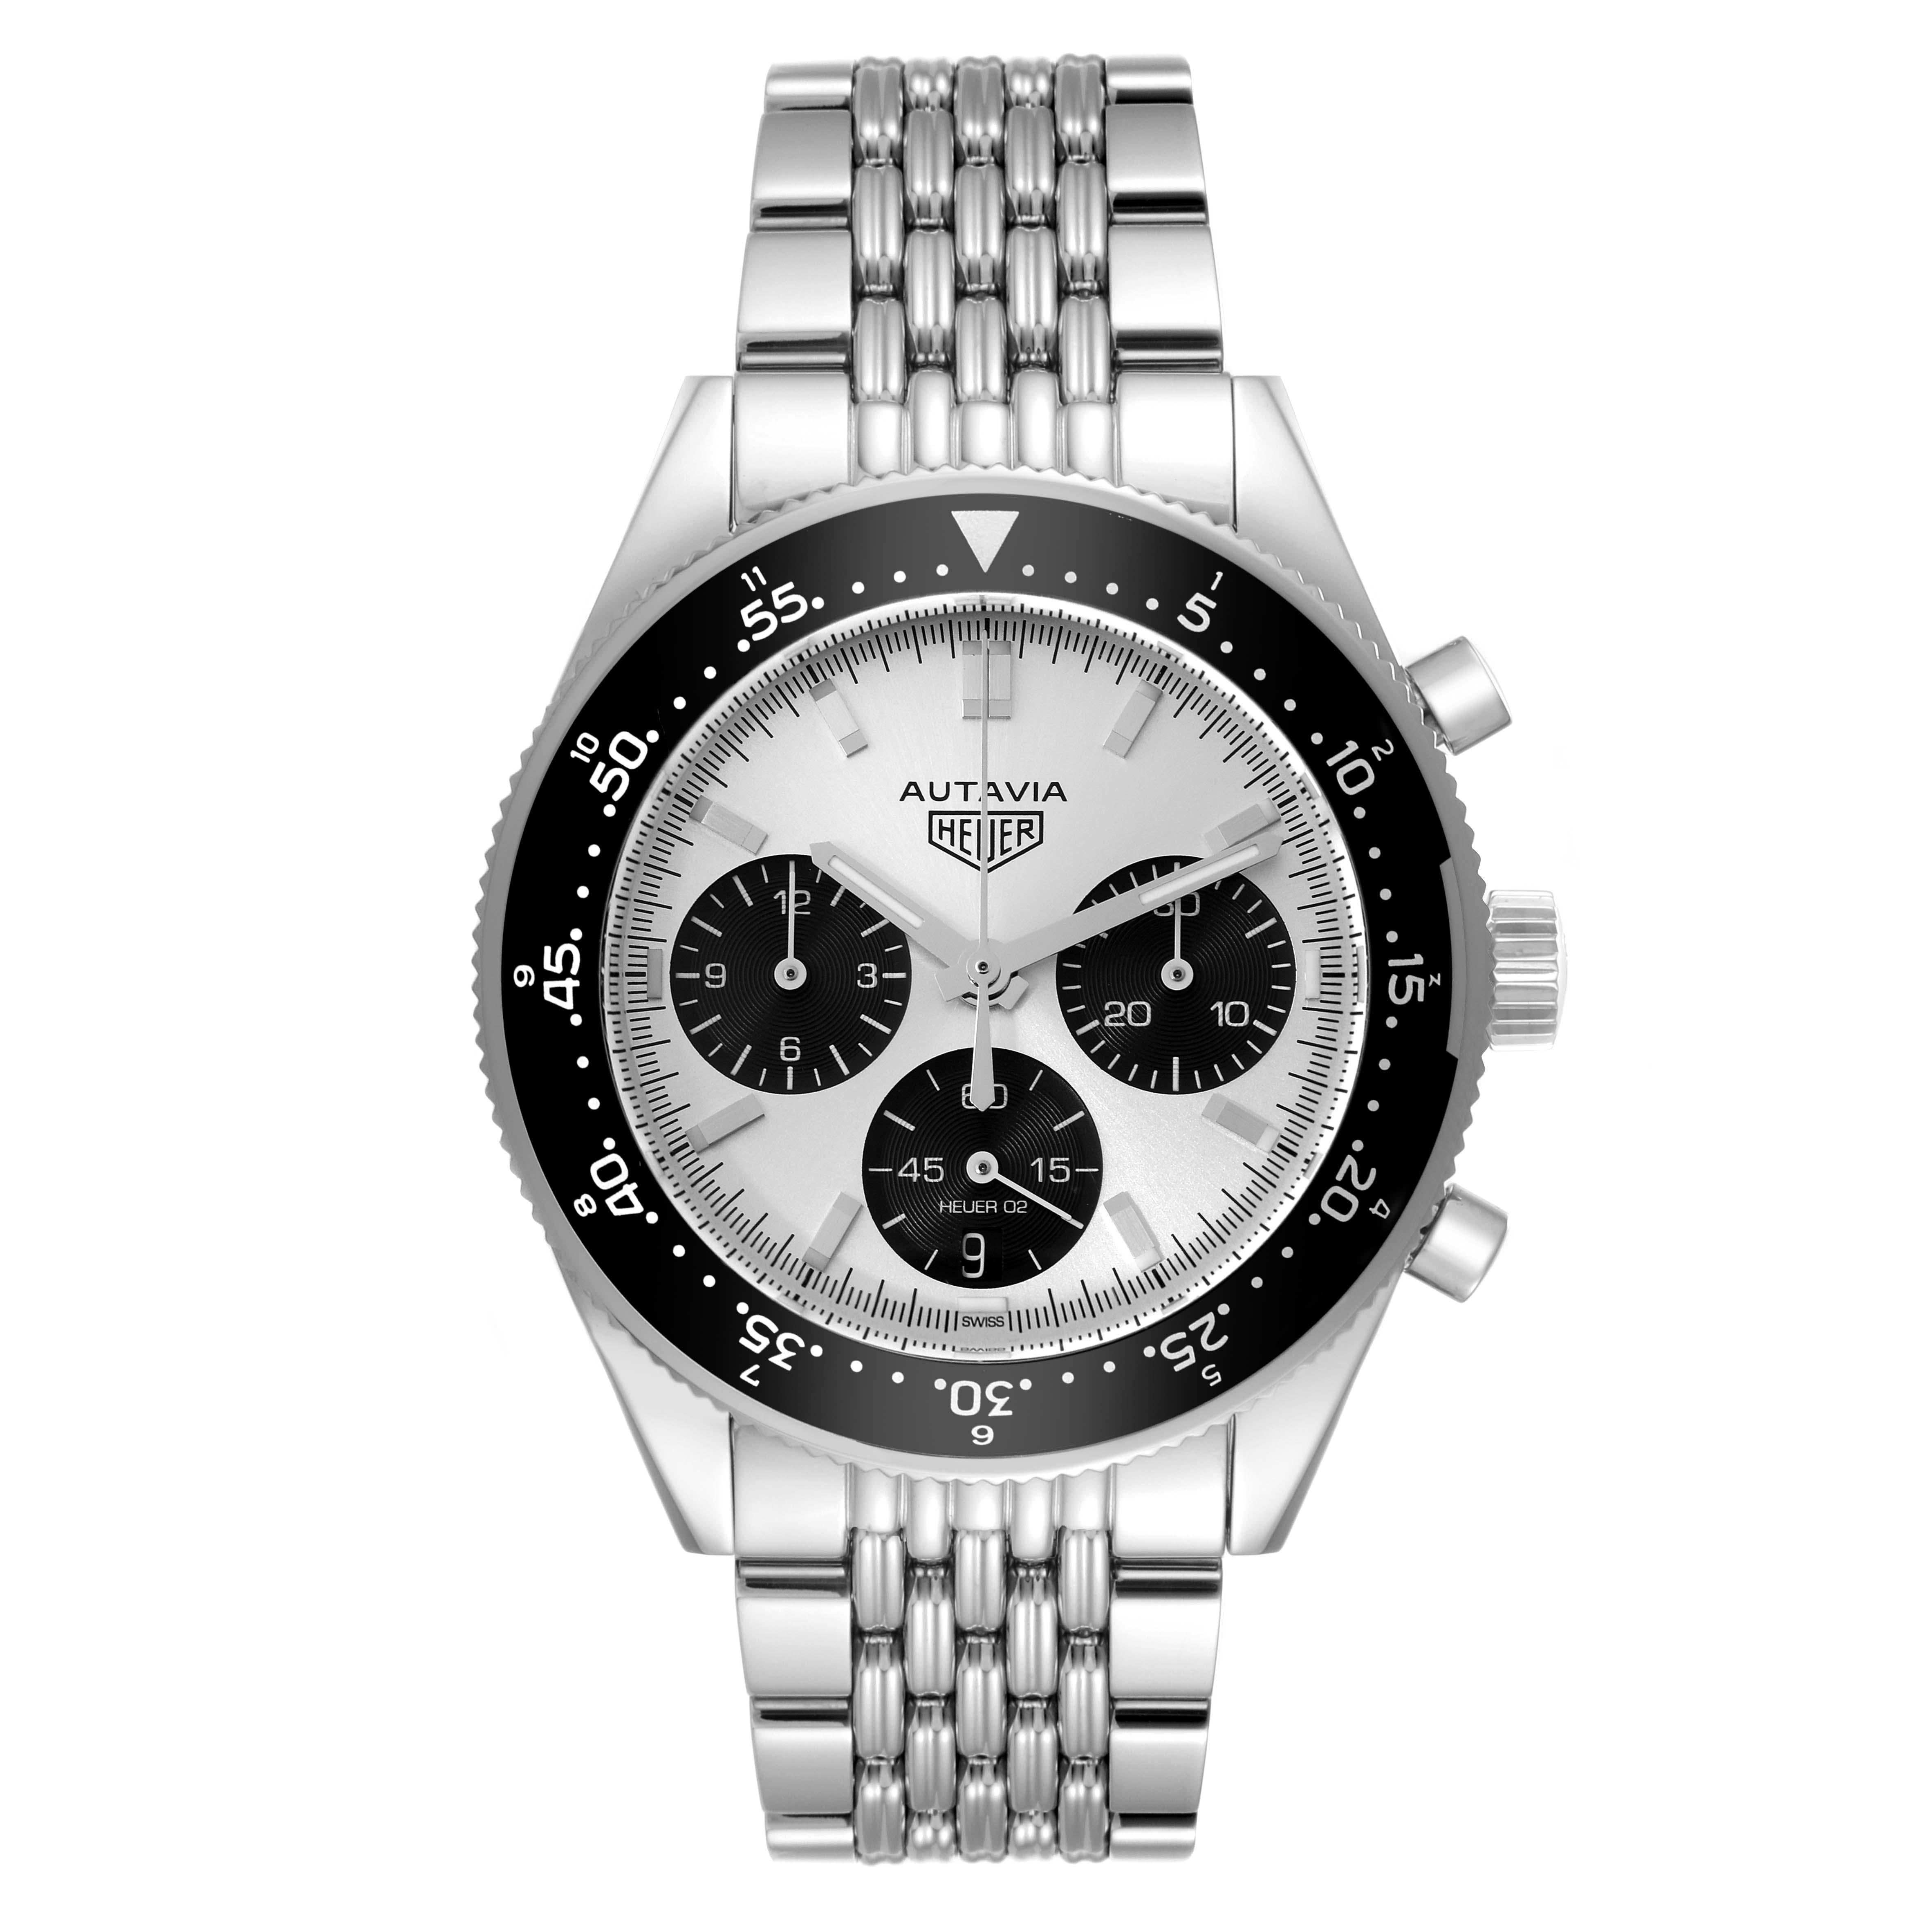 Tag Heuer Autavia Heritage LE Silver Dial Steel Mens Watch CBE2111 Box Card. Automatic self-winding chronograph  movement. Stainless steel case 42 mm in diameter. Caseback engraved with ''Jack Heuer 85th birthday edition''. Stainless steel